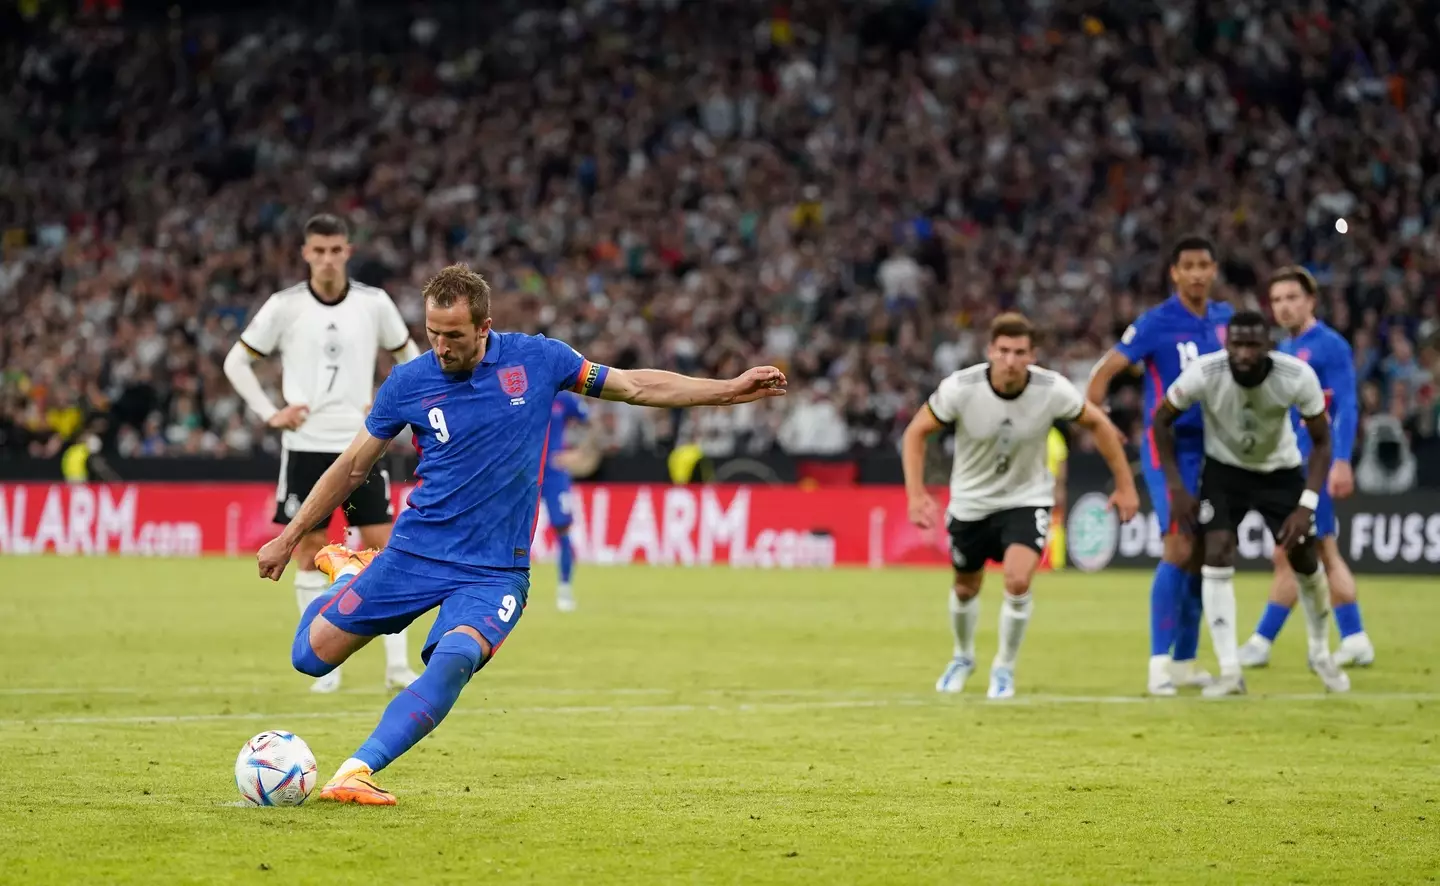 Kane scored a late penalty as England drew 1-1 with Germany (Image: PA)